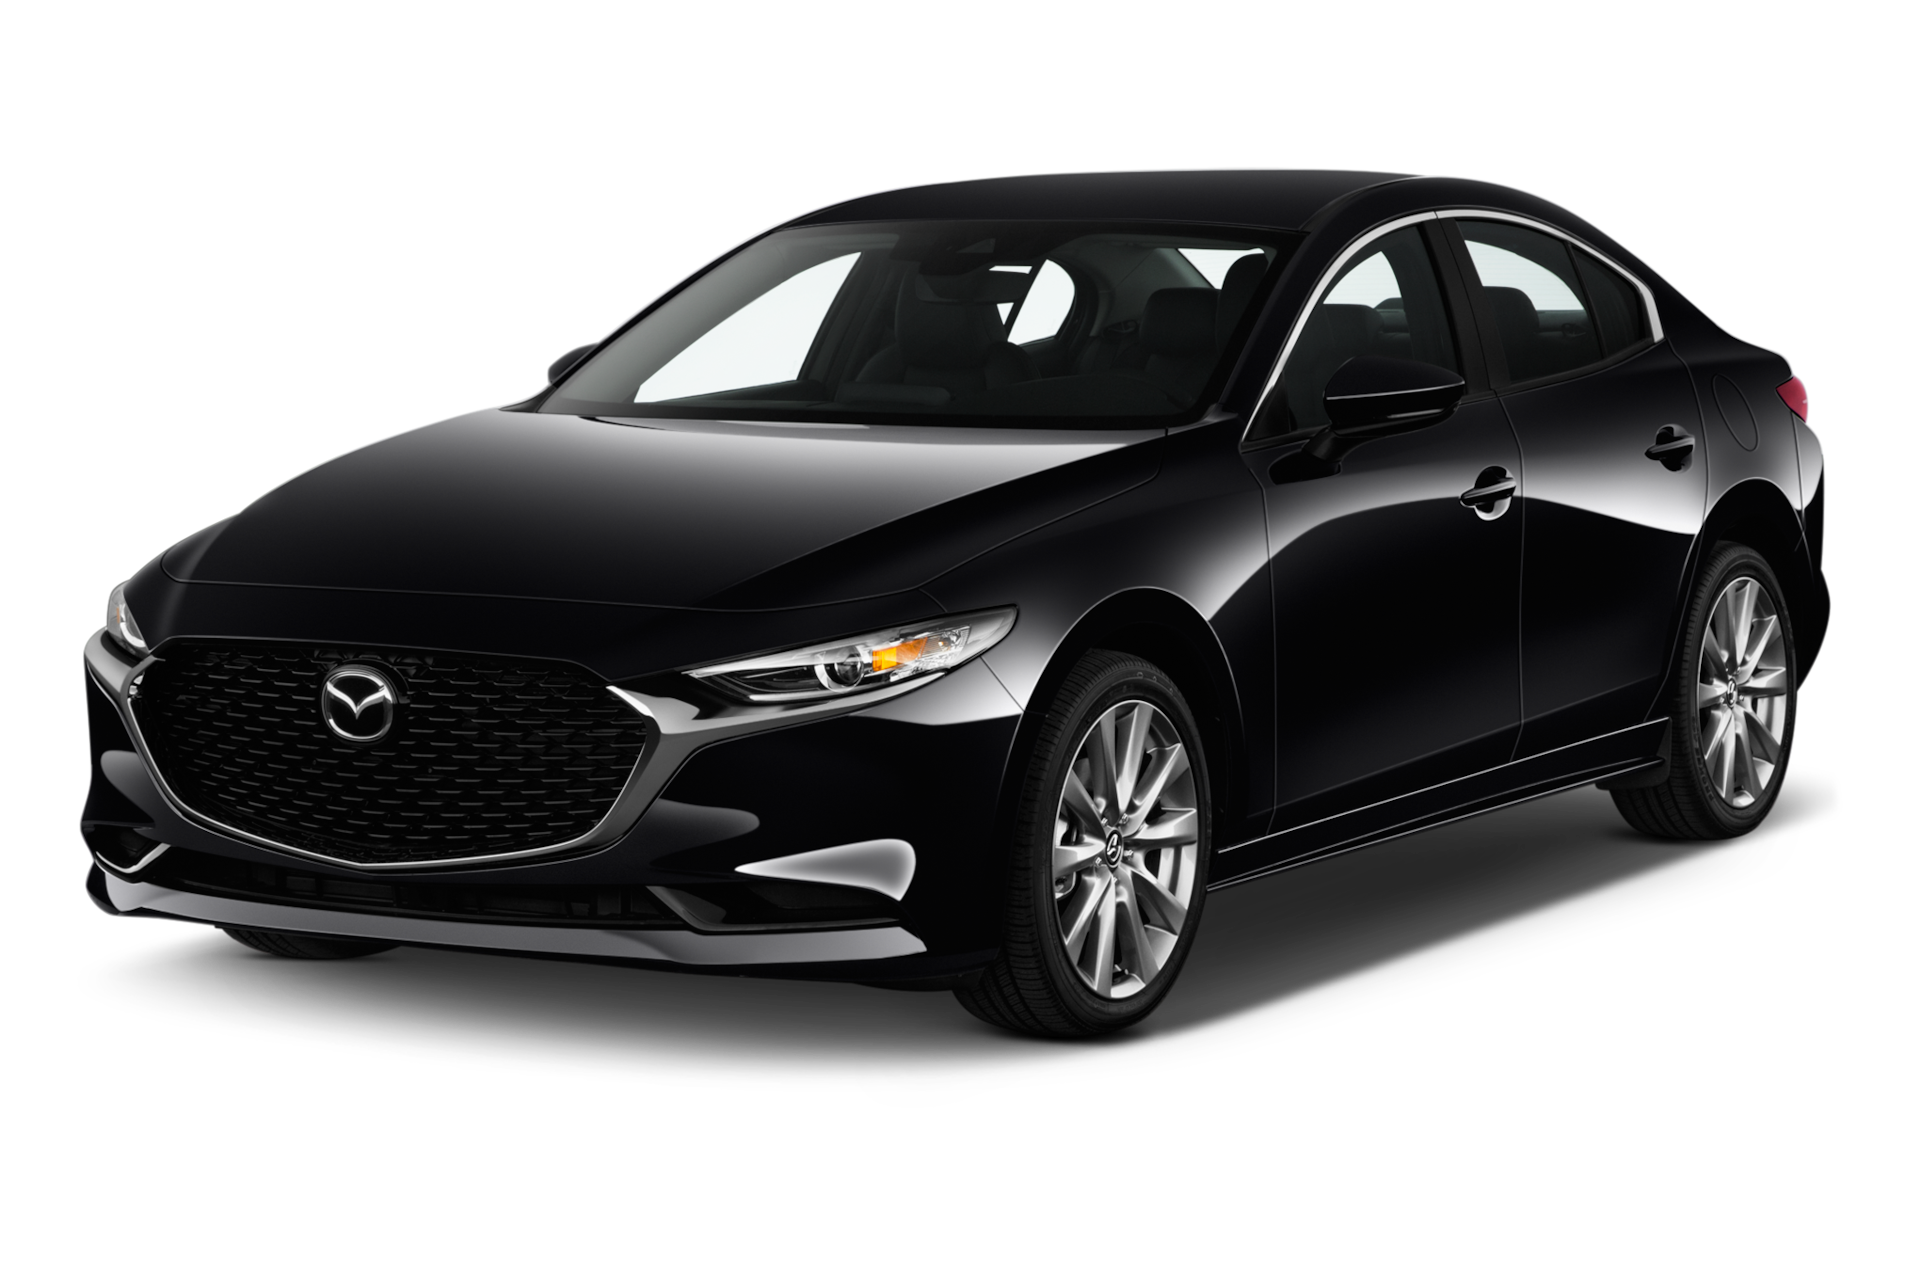 2020 Mazda Mazda3 Prices, Reviews, and Photos - MotorTrend